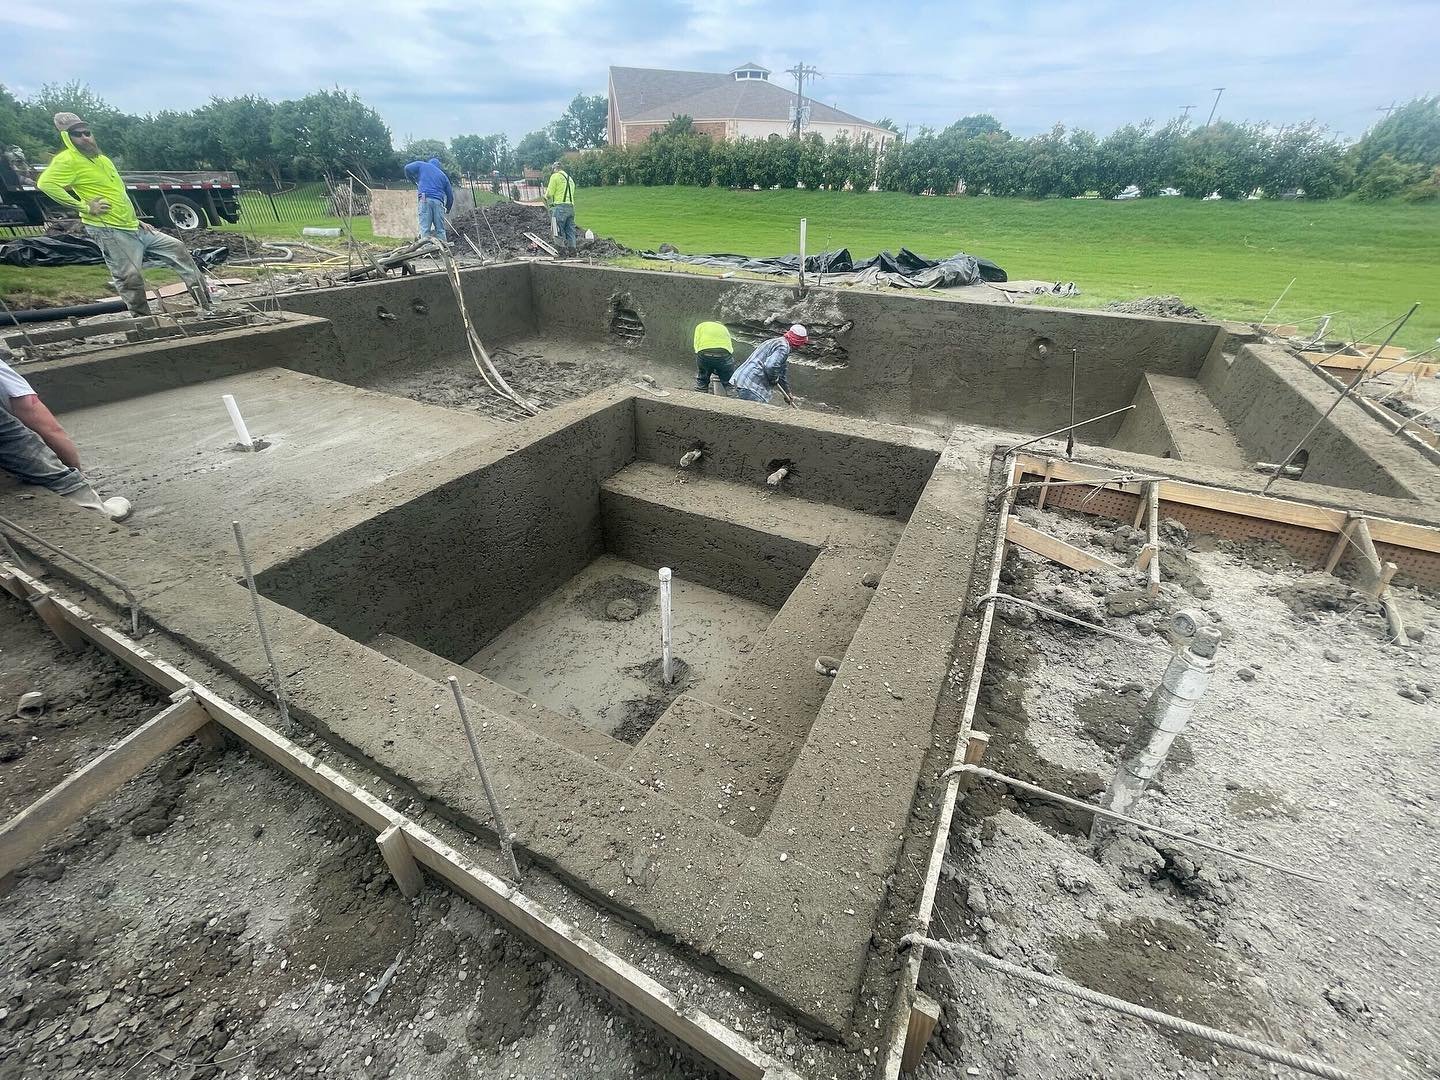 We&rsquo;re getting the shotcrete finished up then we&rsquo;ll be moving on to tile and coping! 🤩

#FoleyPools #pool #outdoorliving #pooldesign #construction #outdoorliving #renovation #poolbuilder #excavator #excavation #gunitepool #poolconstructio